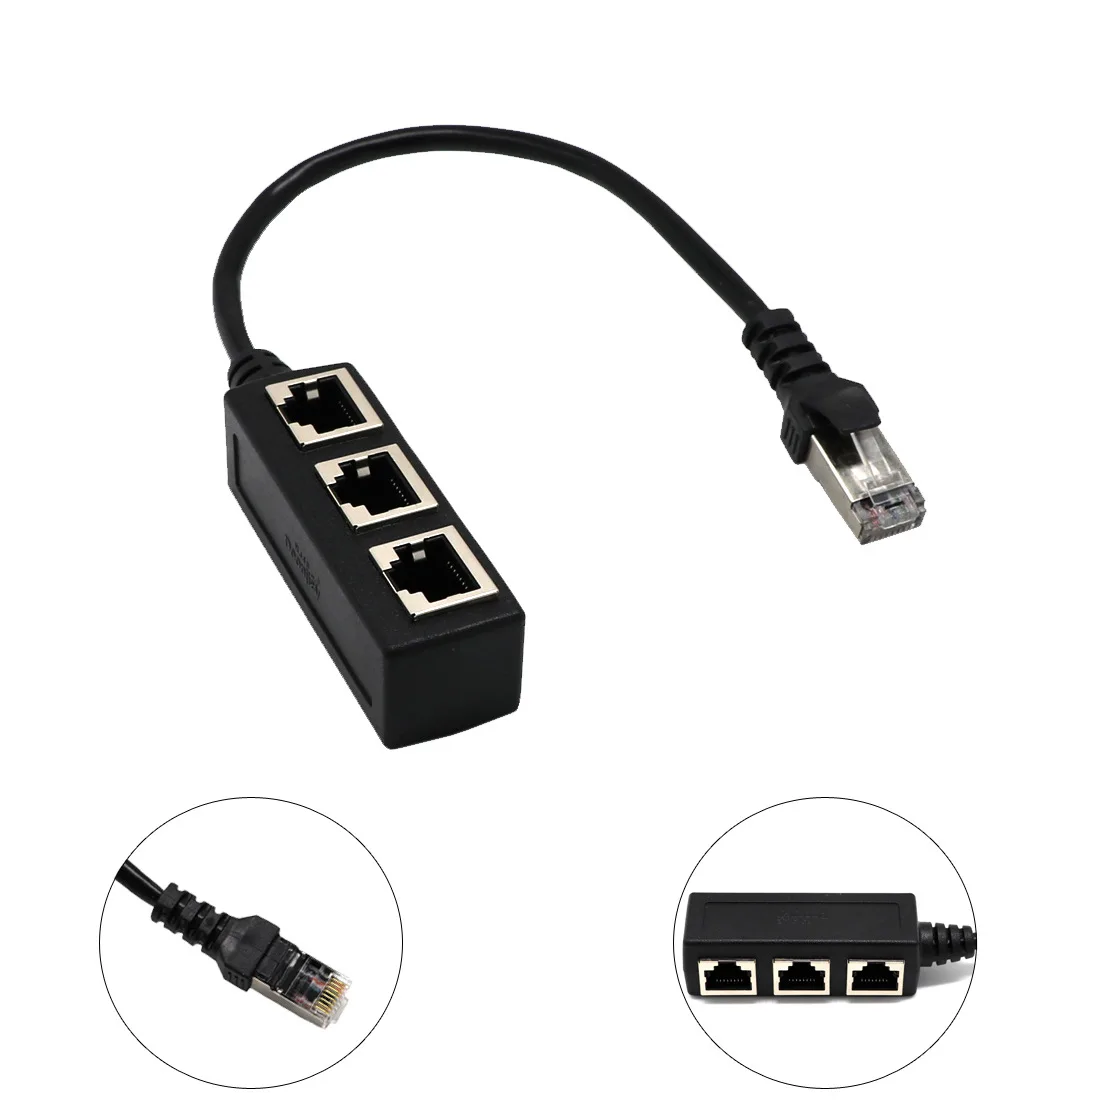 3 in 1 RJ45 Splitter LAN Ethernet Network RJ45 Connector Extender Adapter Cable for Networking Extension 1 Male to 2/3 Female